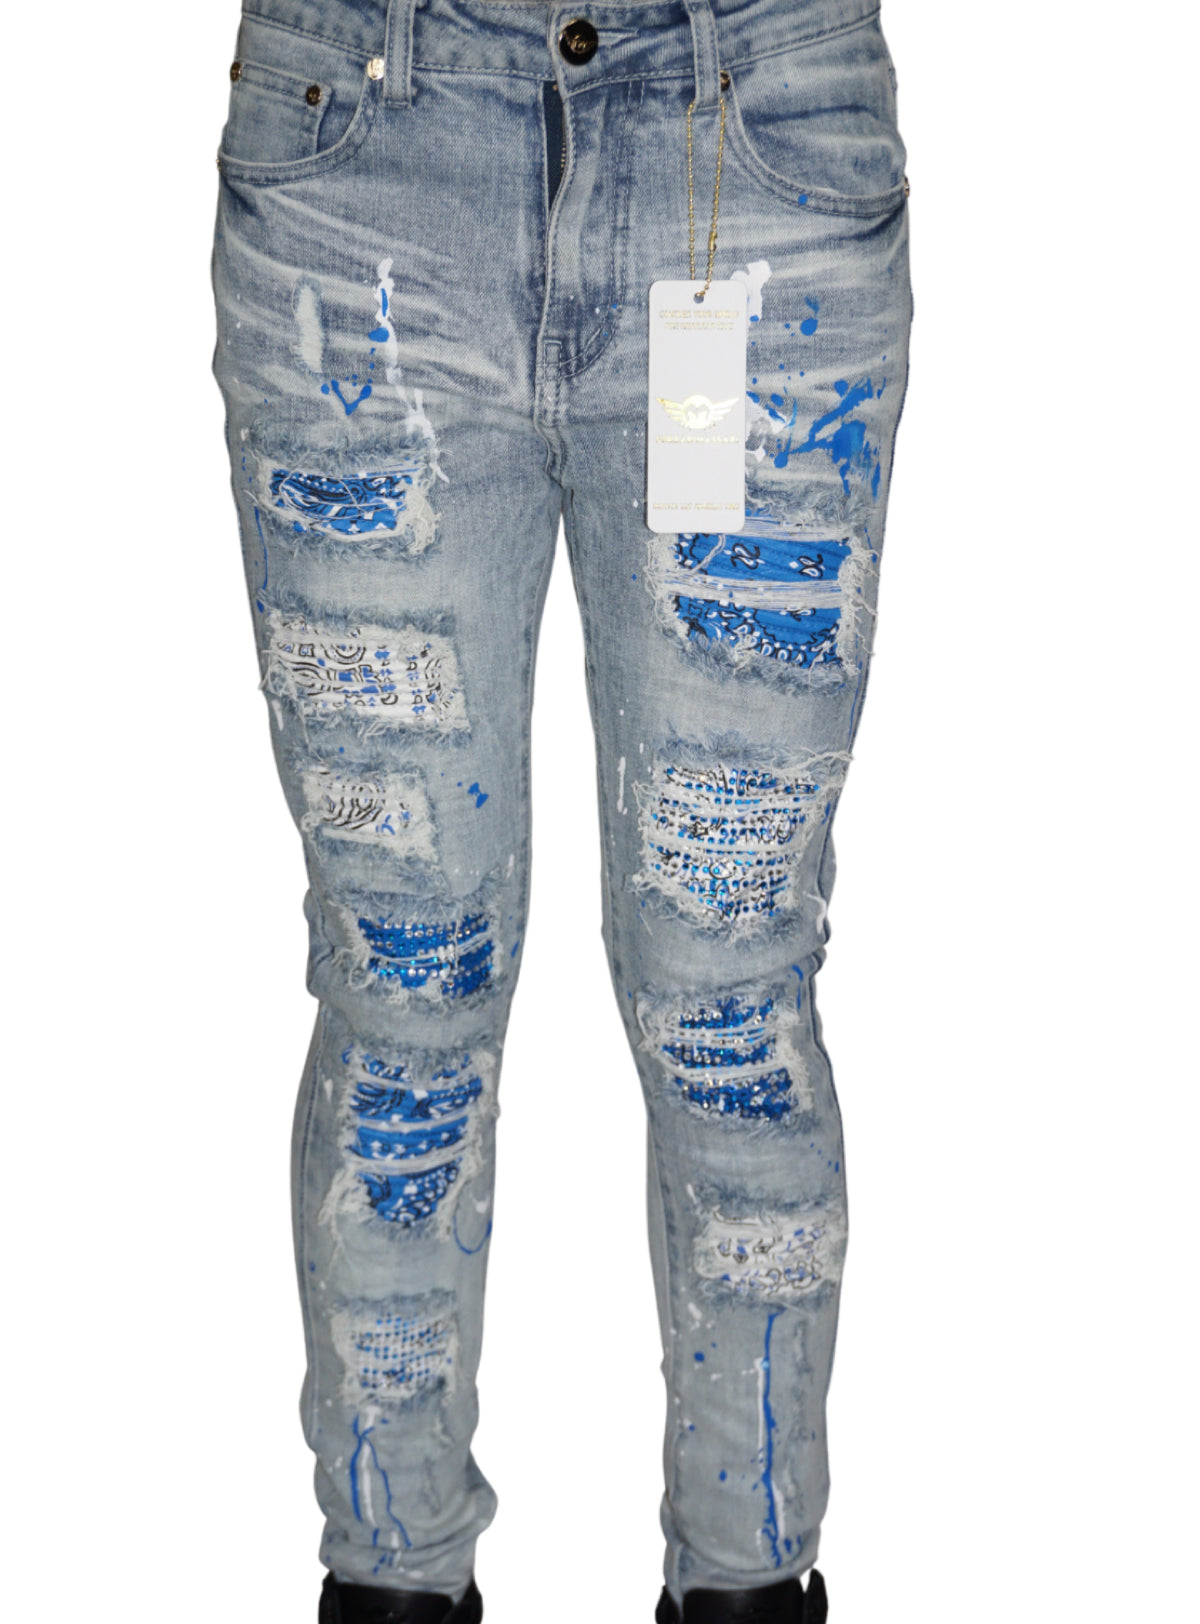 Moncly x bloody jeans #outfitideas #streetwear #drip #thevaluee #outfit  #drill #skinnyjeans 